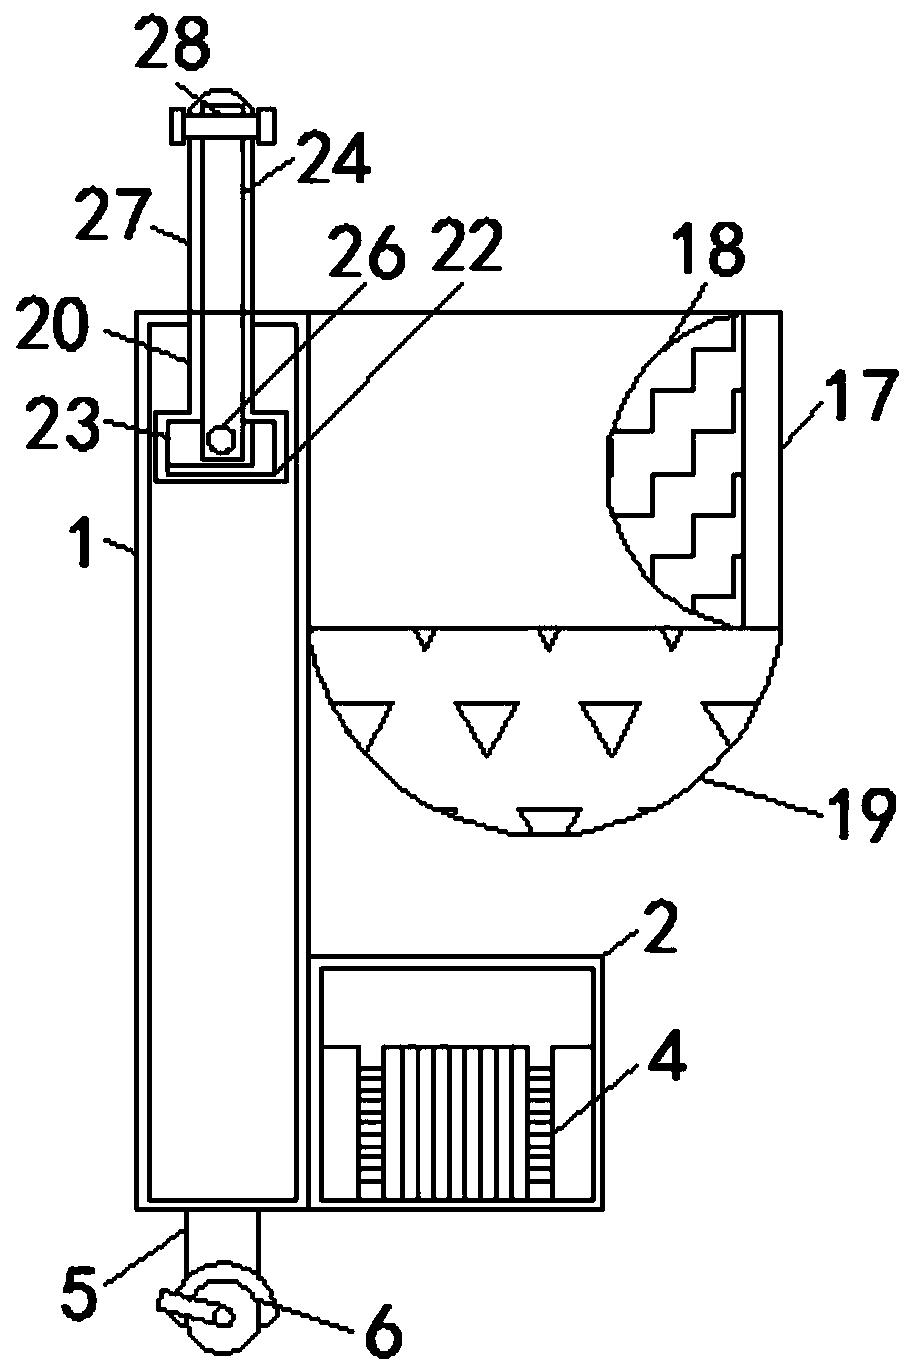 A vibrating picking device for convenient fruit picking